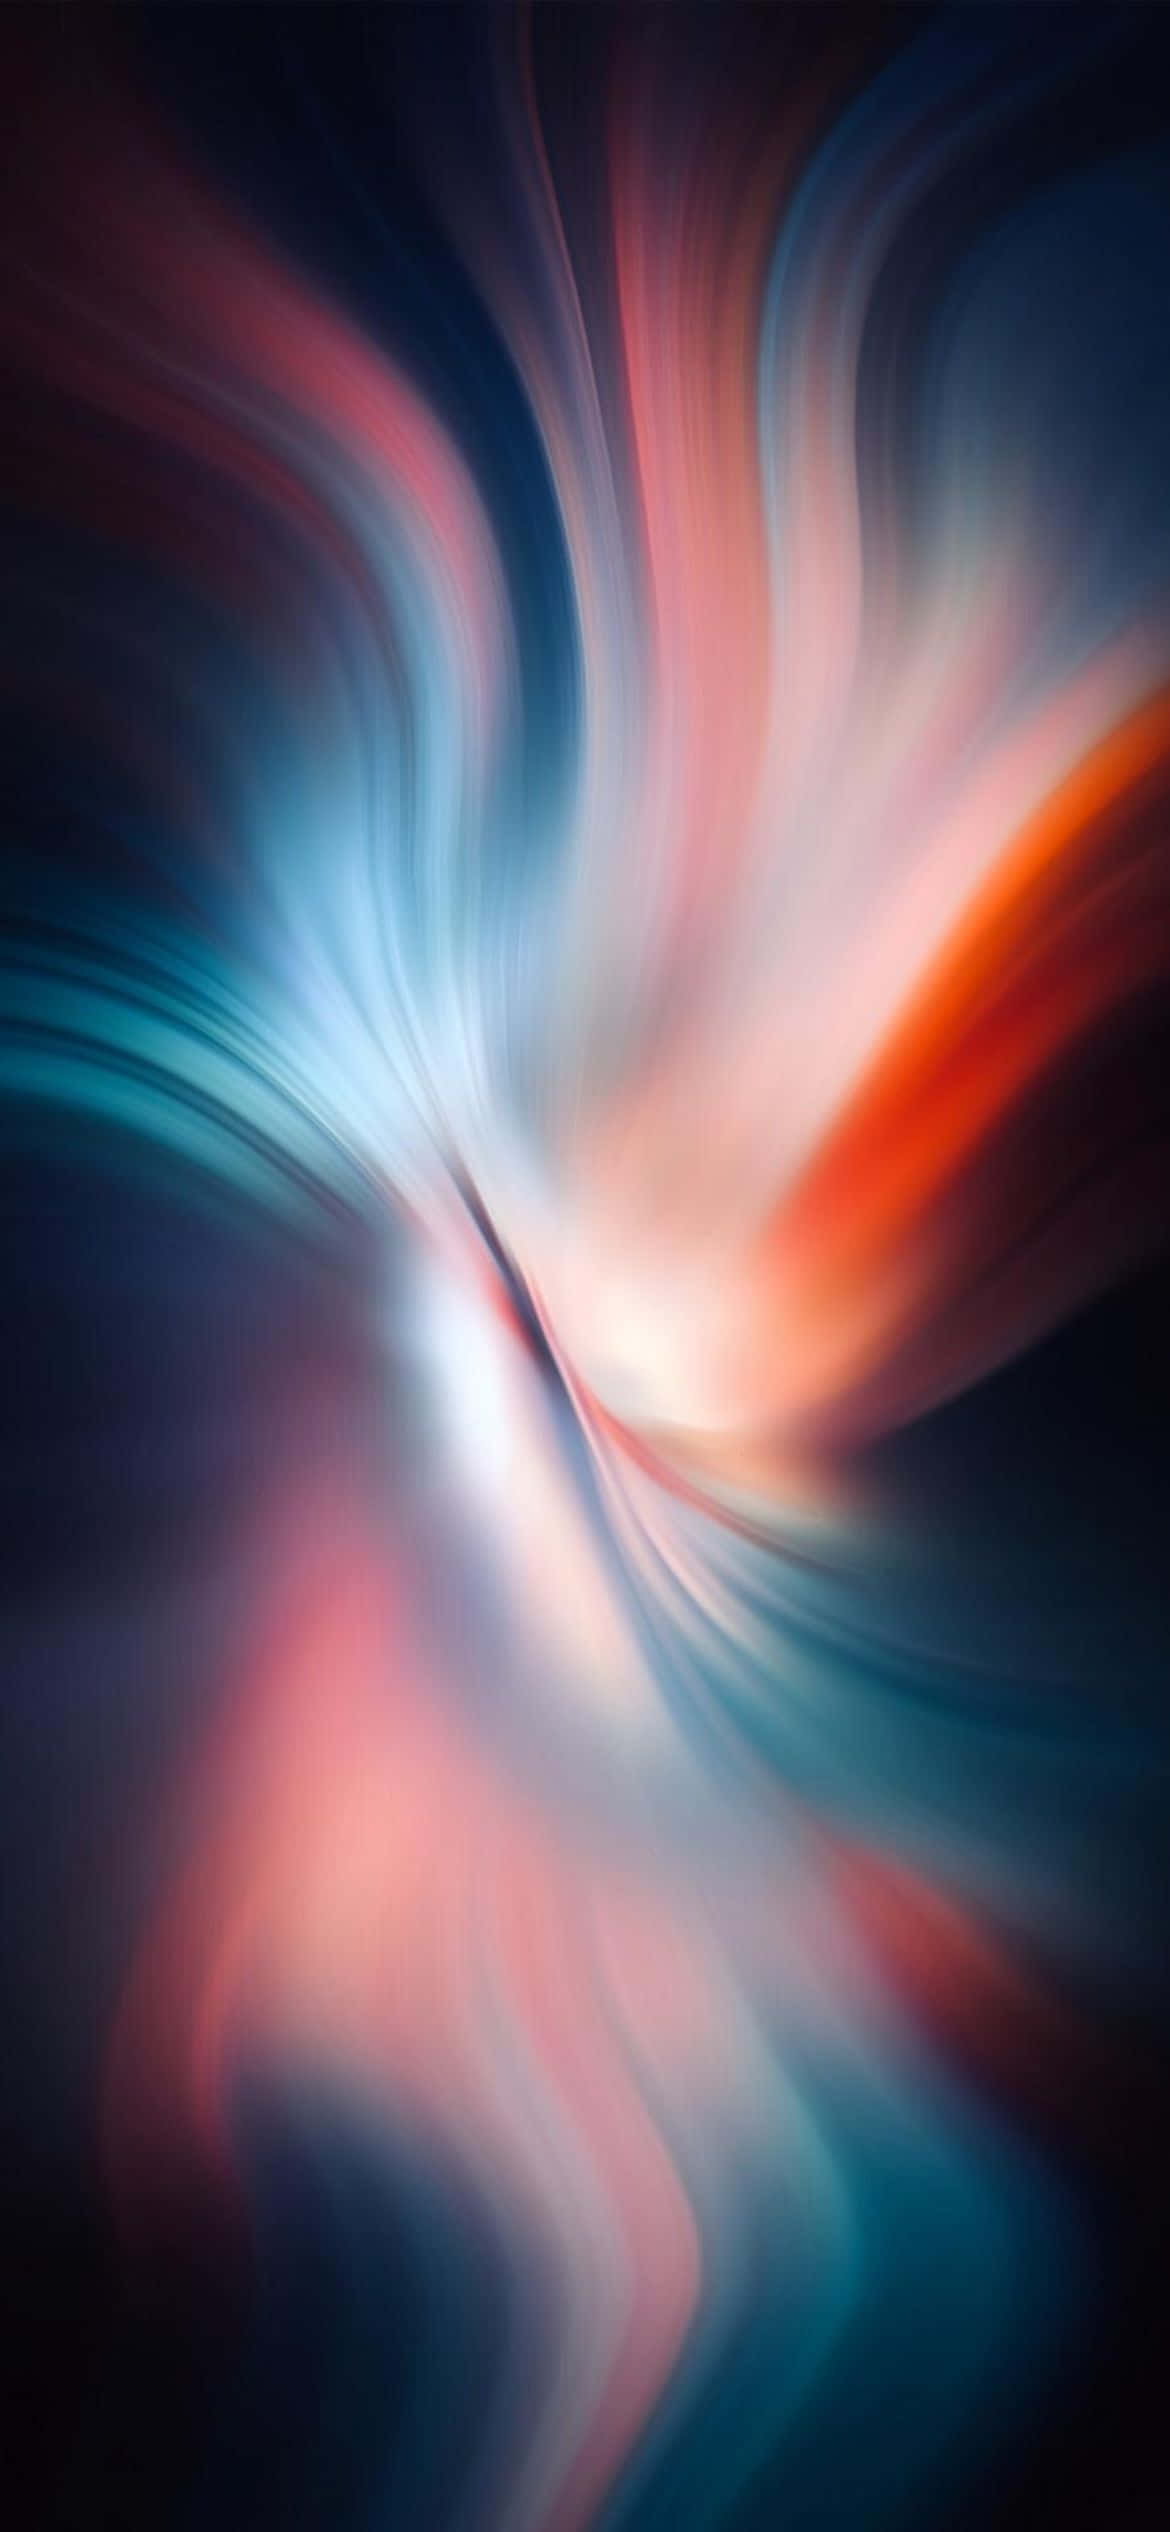 Download The new iPhone 13 in all its glory | Wallpapers.com